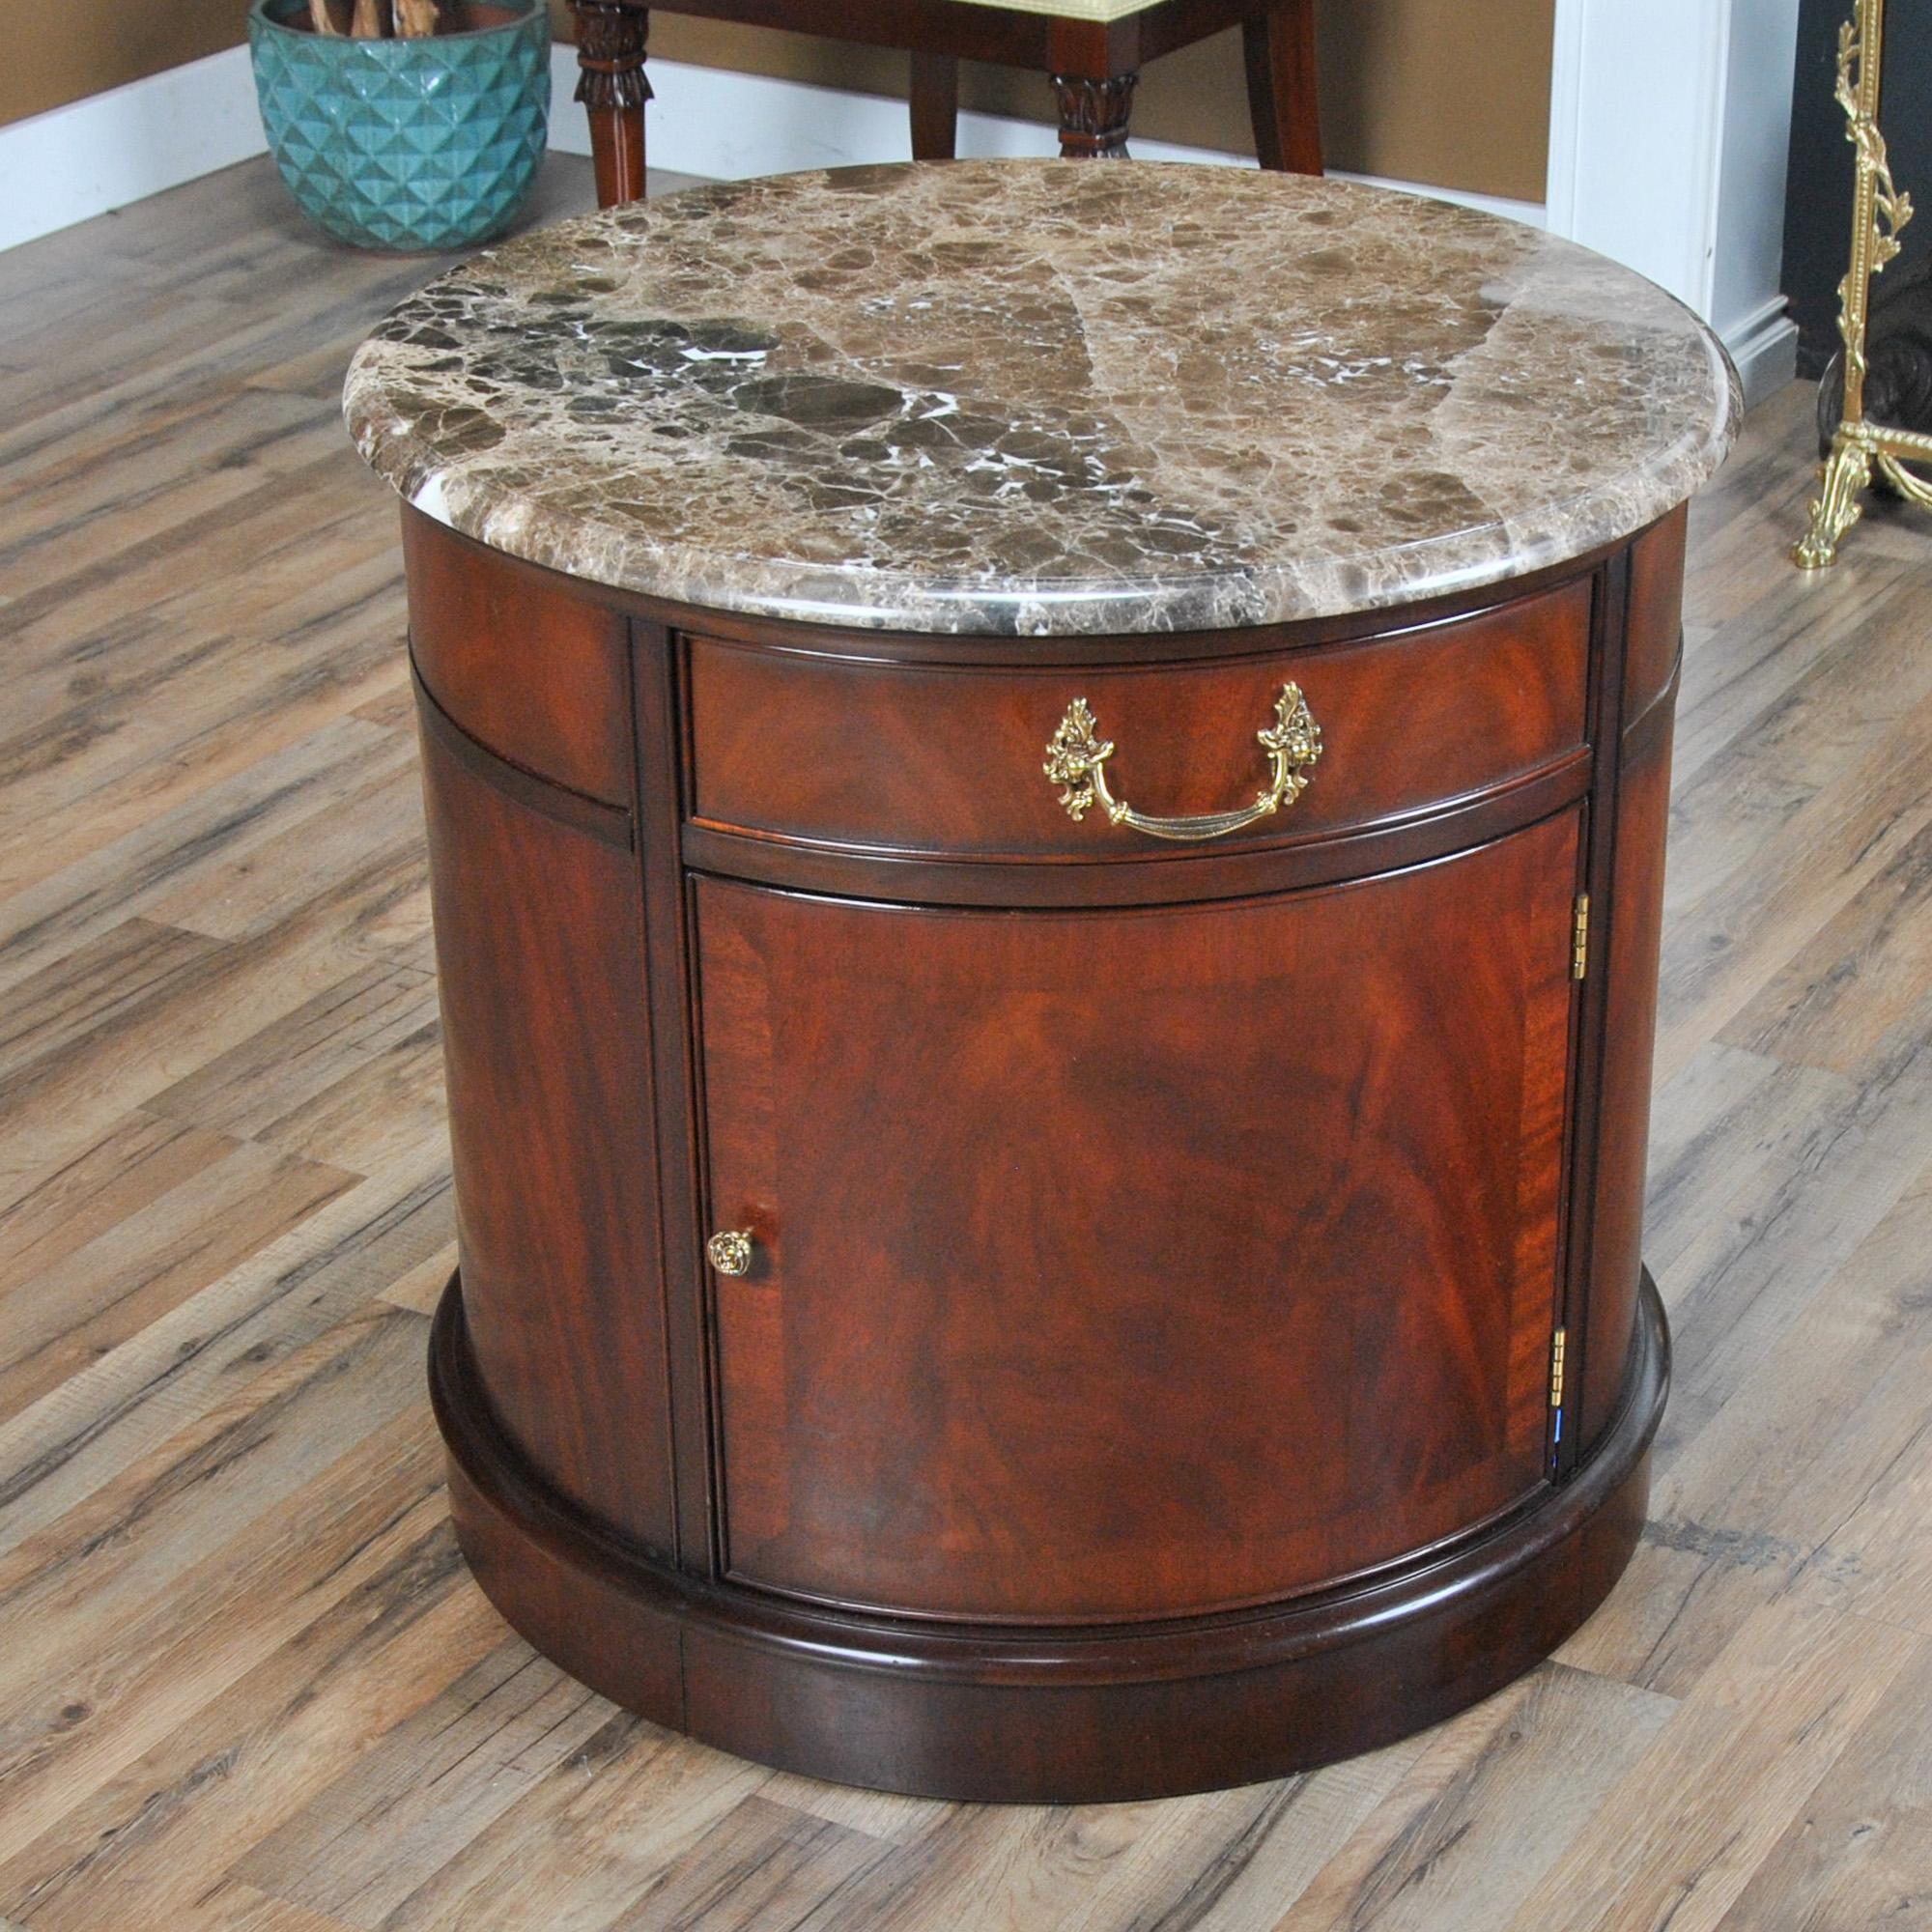 A Vintage Vintage Round Henkel Harris End Table in excellent original, as found, condition.

Both elegant and incredibly detailed this beautiful Vintage Round Henkel Harris End Table has everything one could ask for as a focal point for your